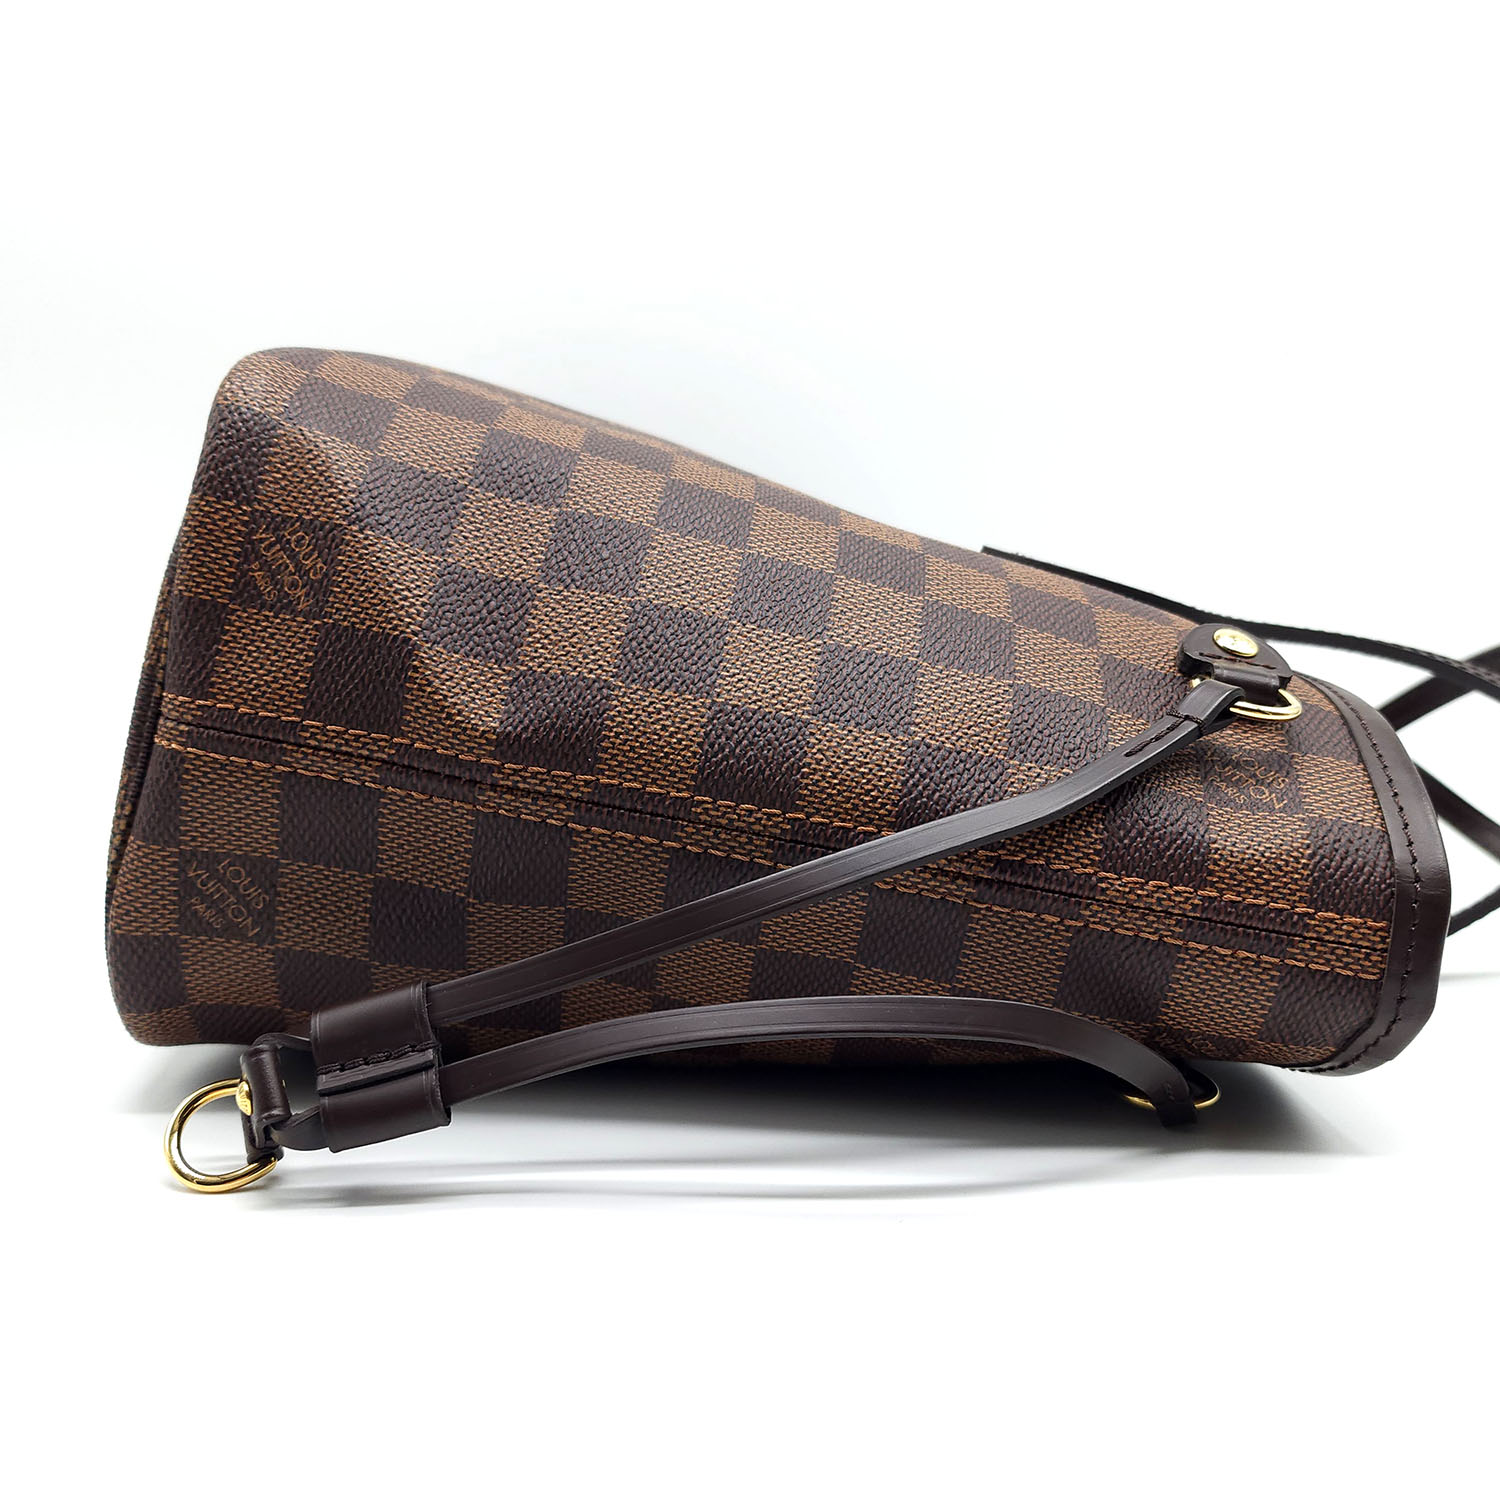 Louis Vuitton Neverfull PM Damier Ebene with pouch edition 📌very